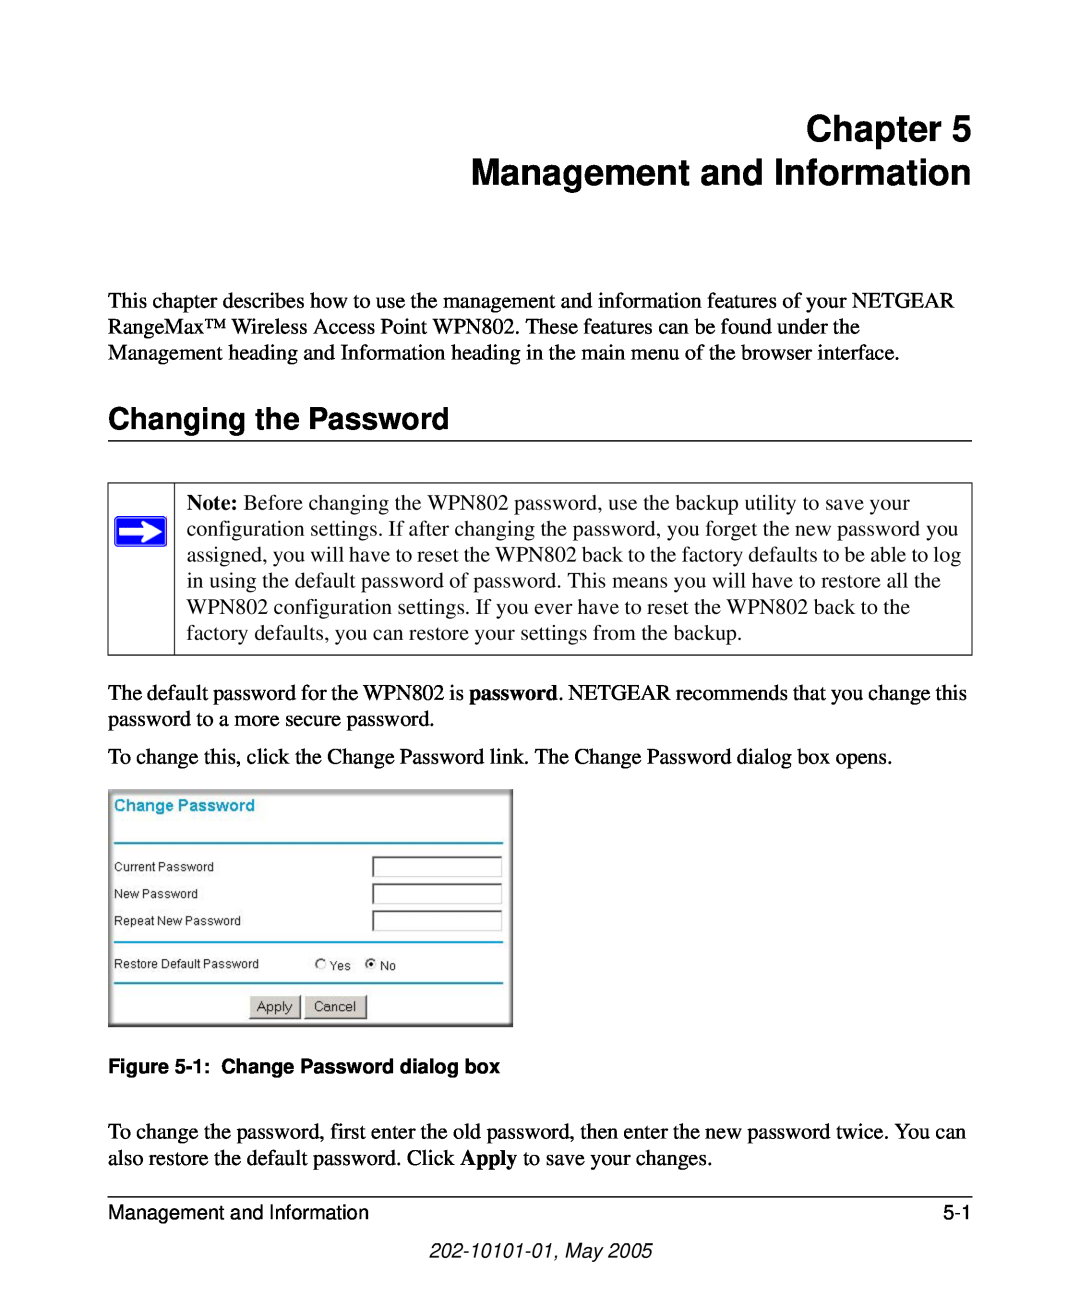 NETGEAR WPN802 manual Chapter Management and Information, Changing the Password 